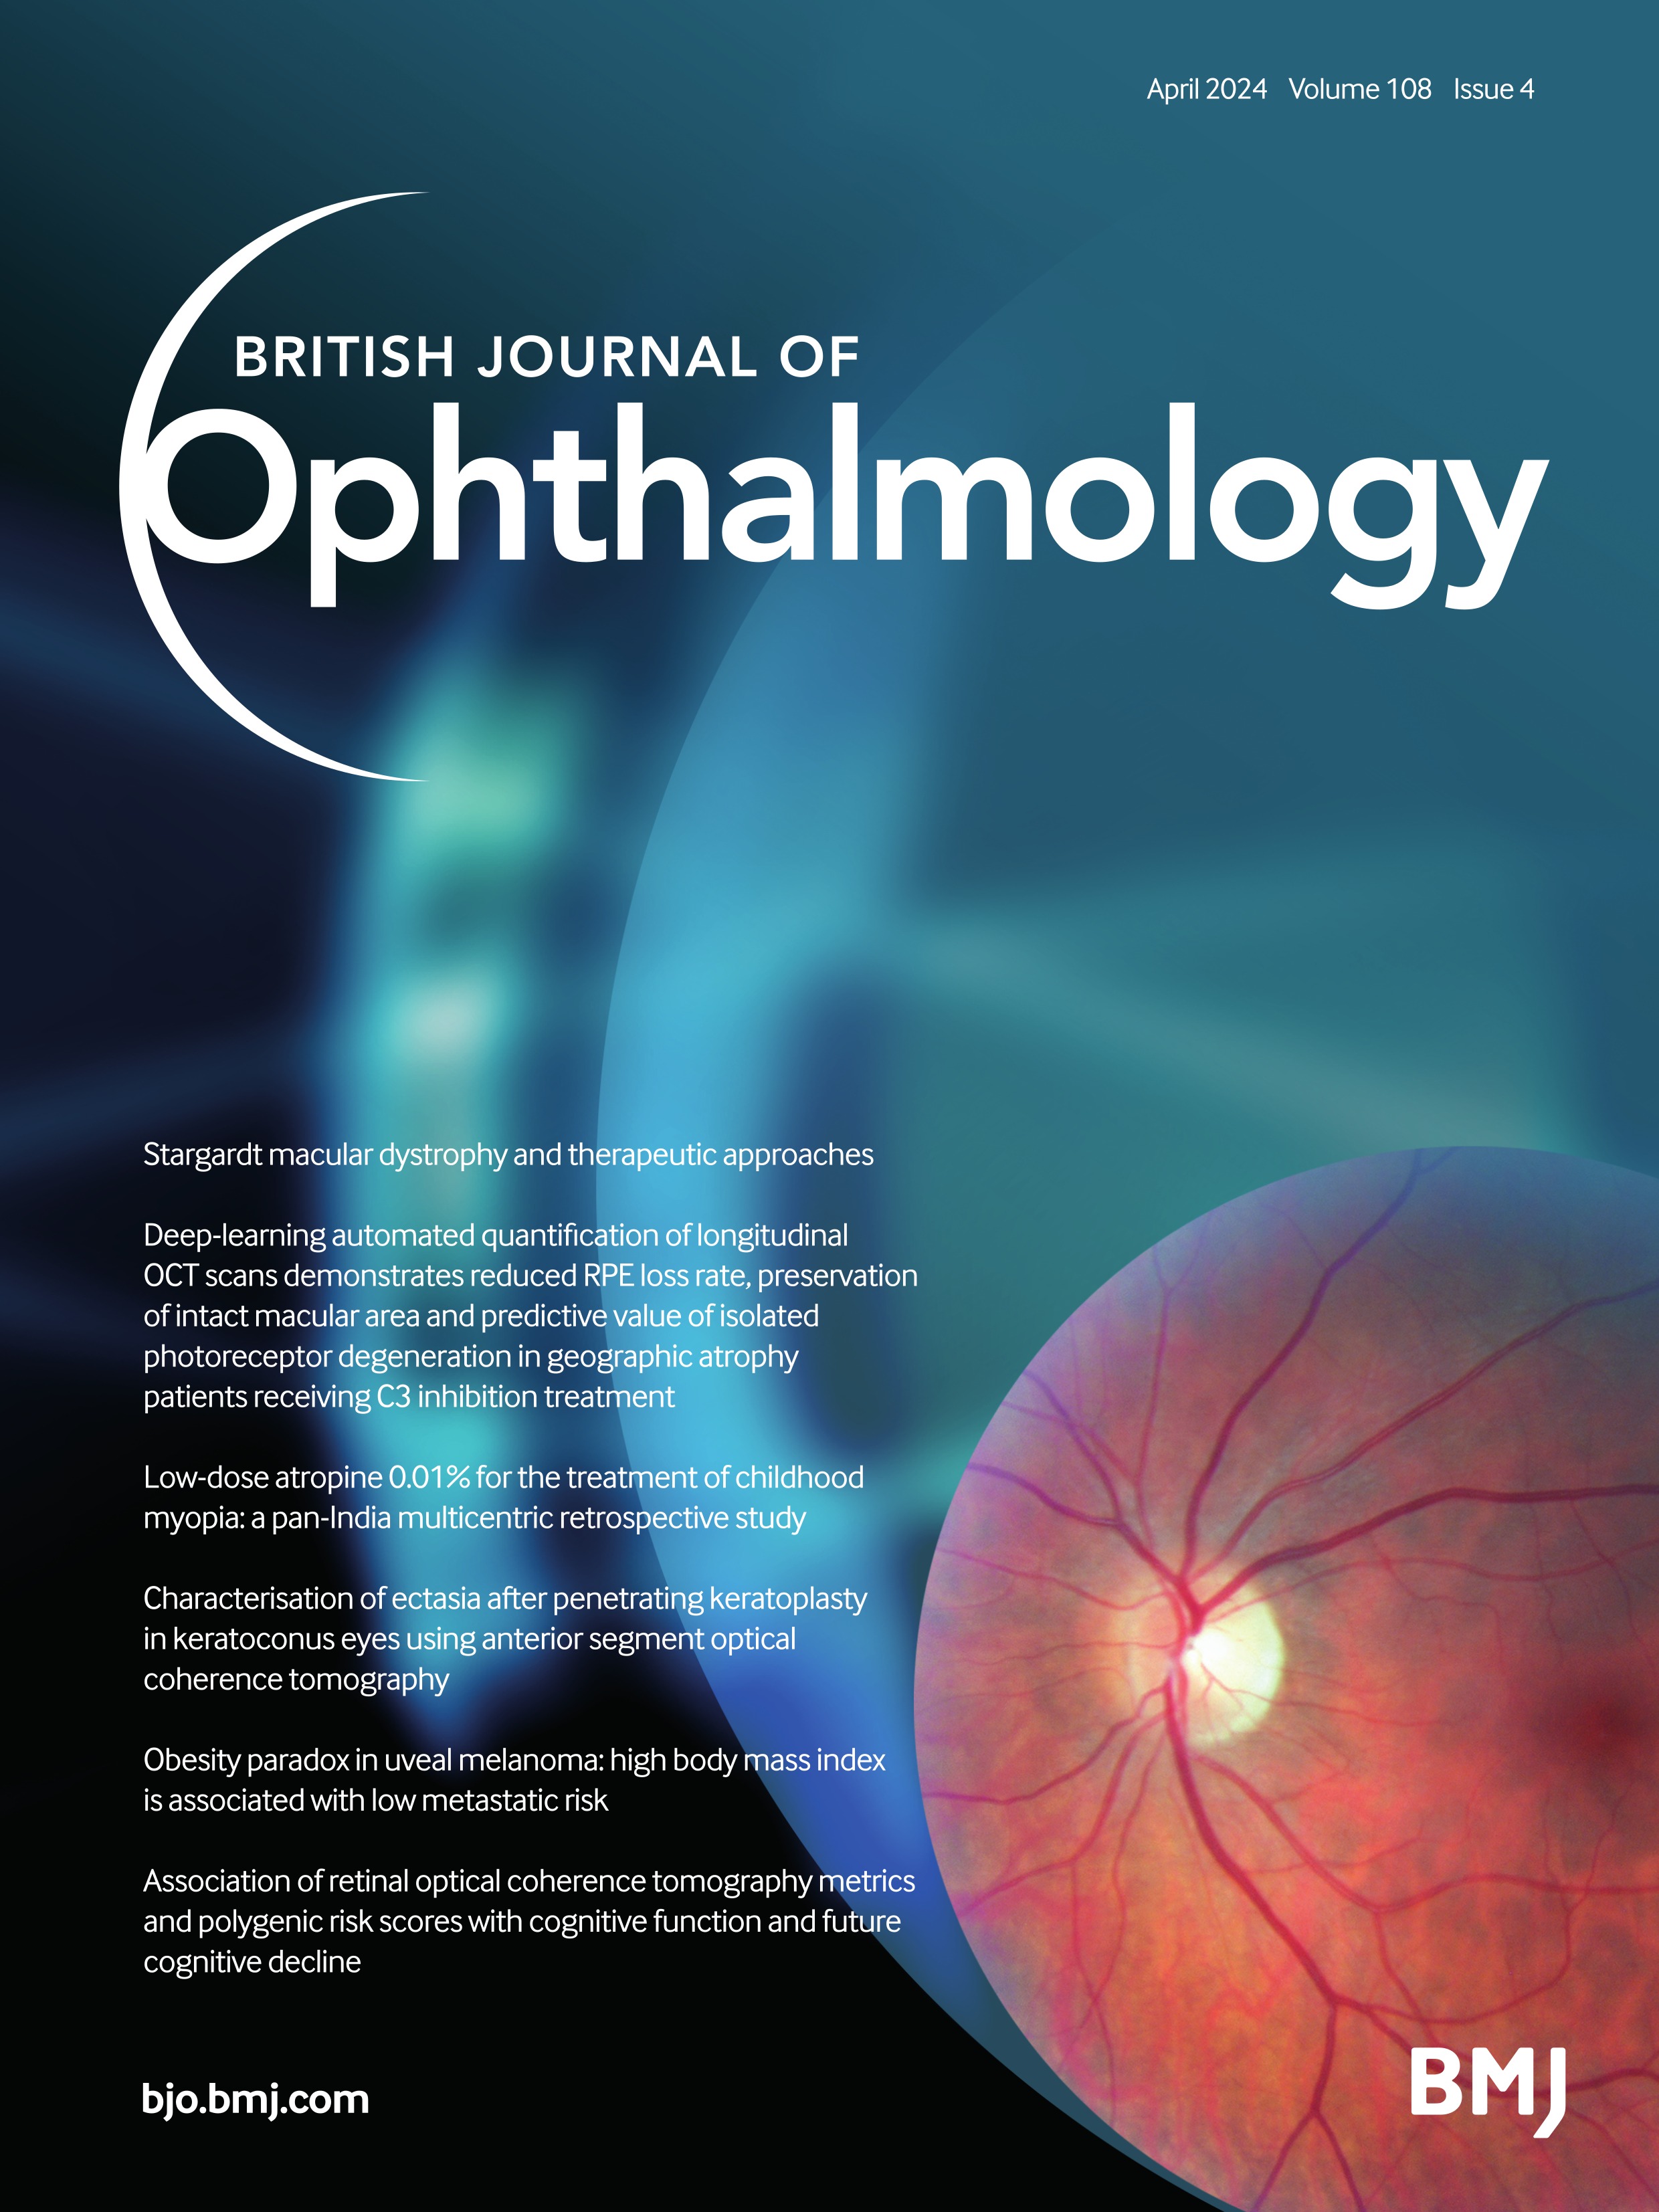 Outcomes following repair of early-onset versus delayed-onset rhegmatogenous retinal detachments after acute posterior vitreous detachment